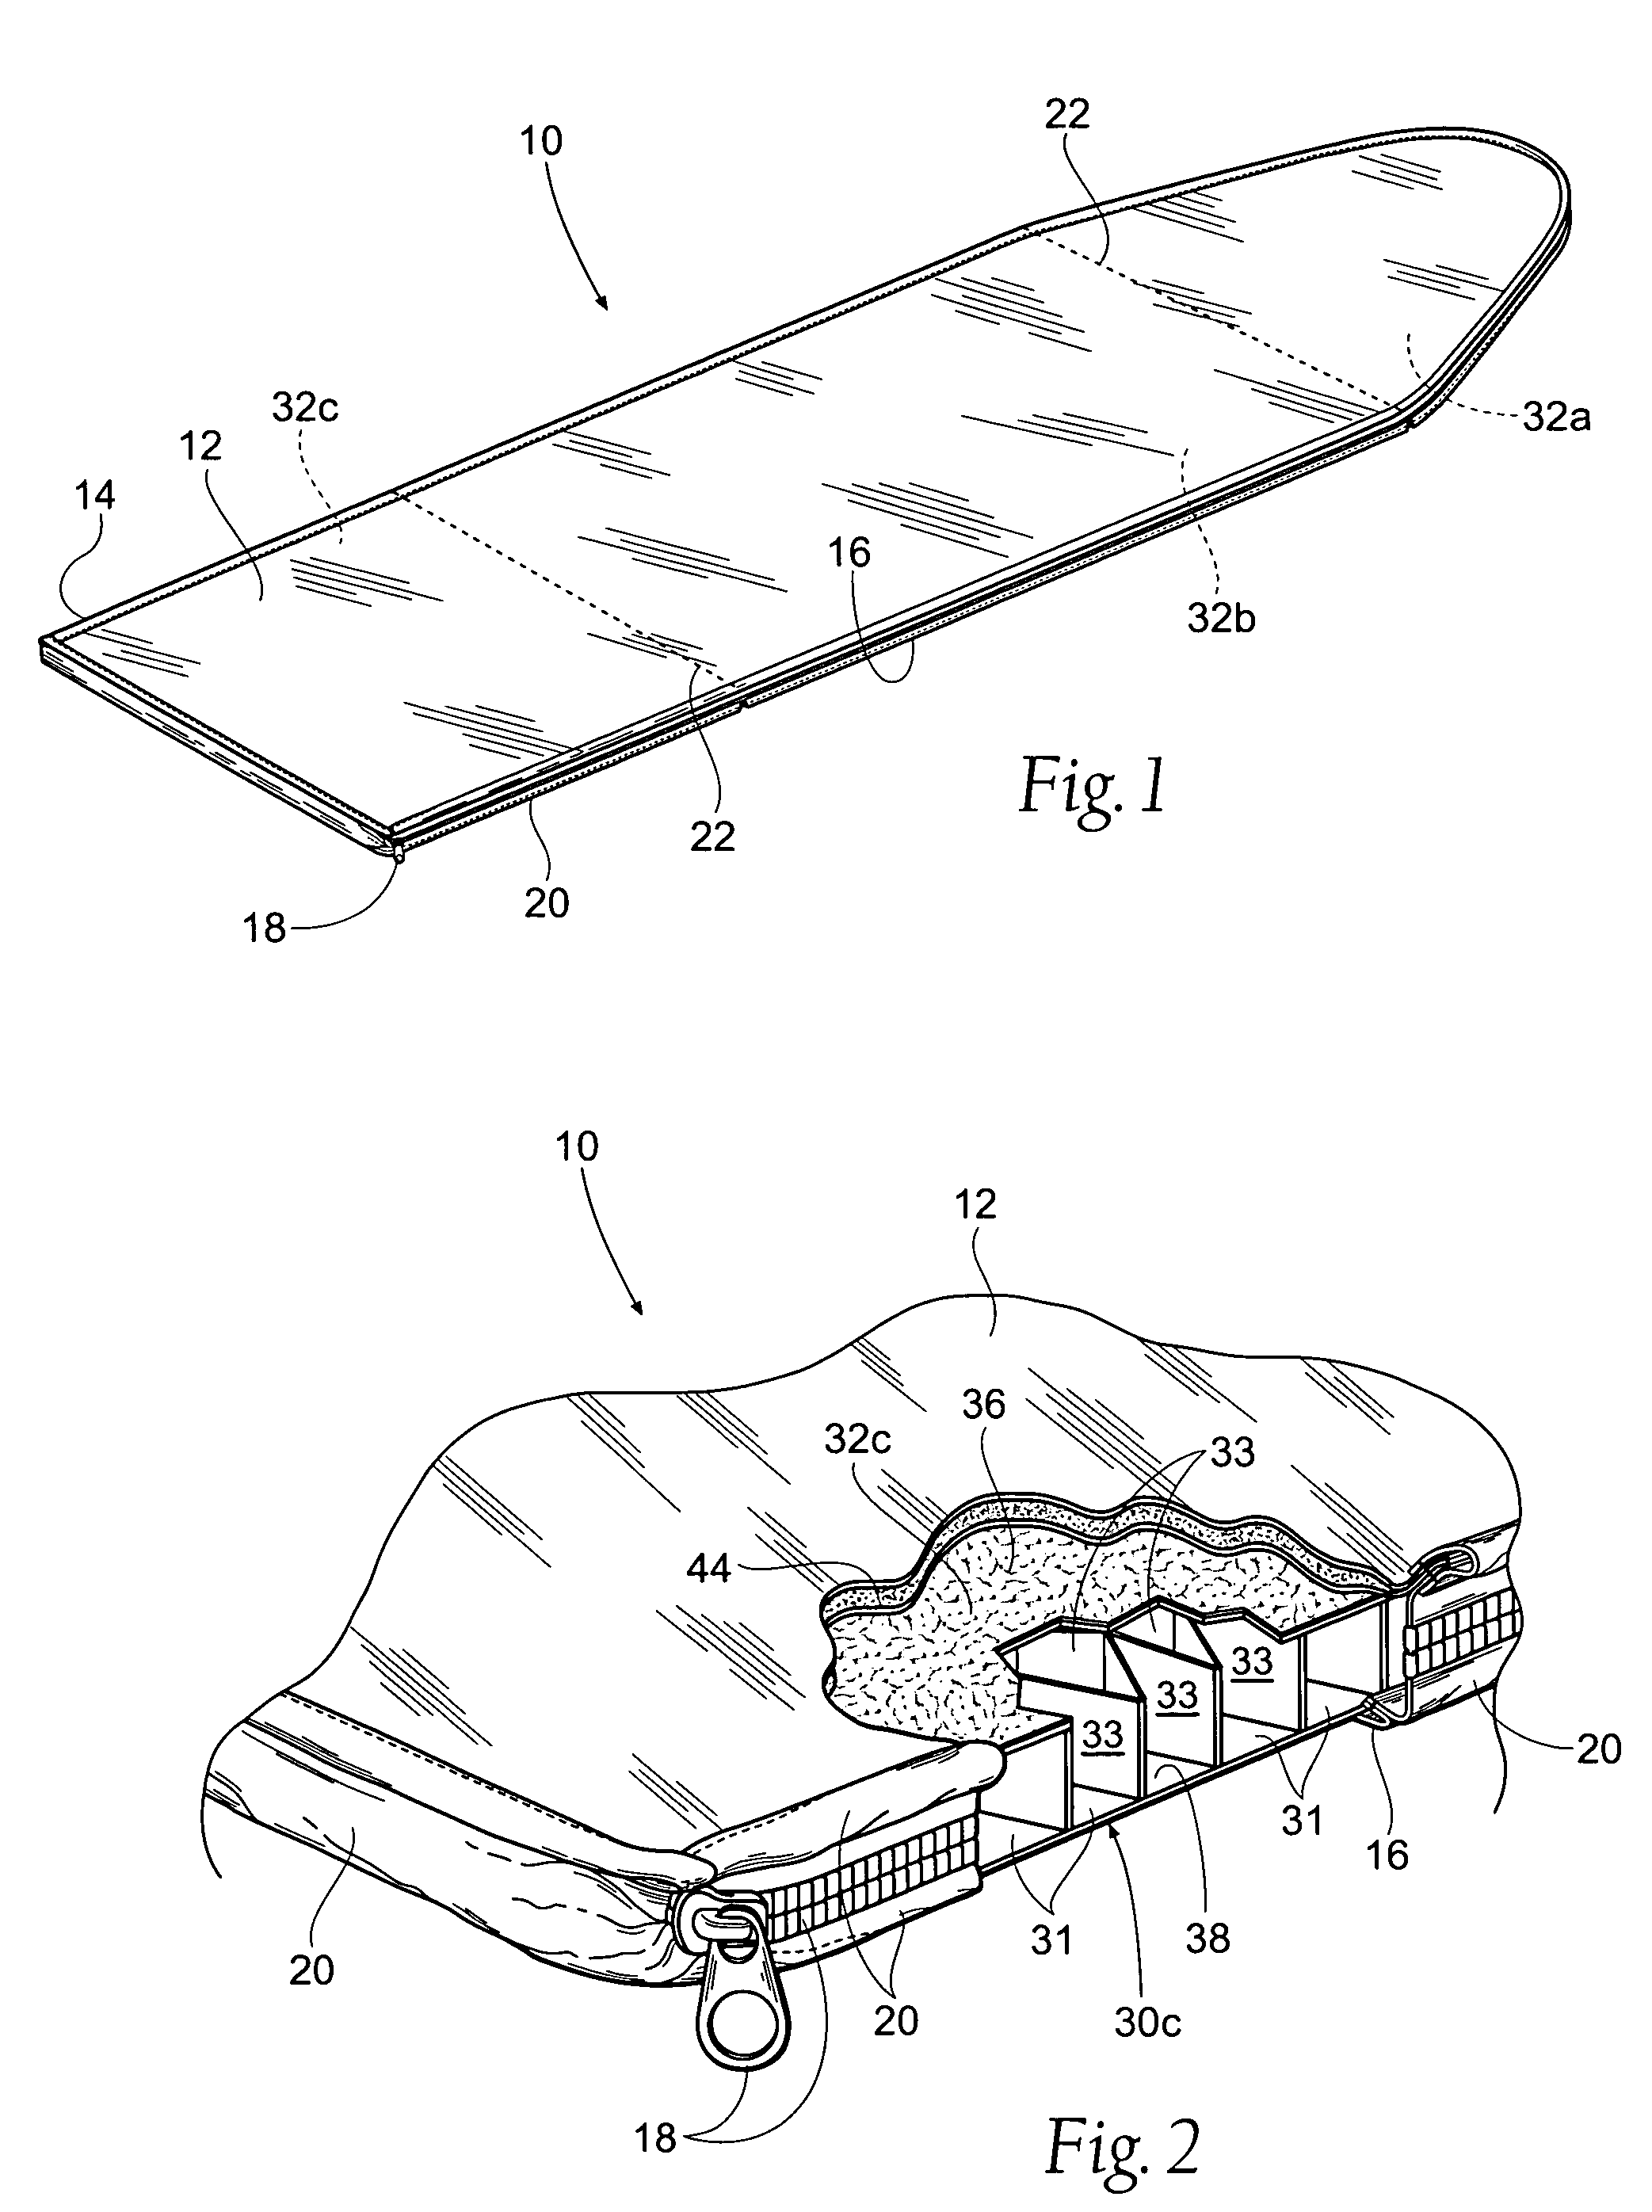 Portable ironing pad assembly